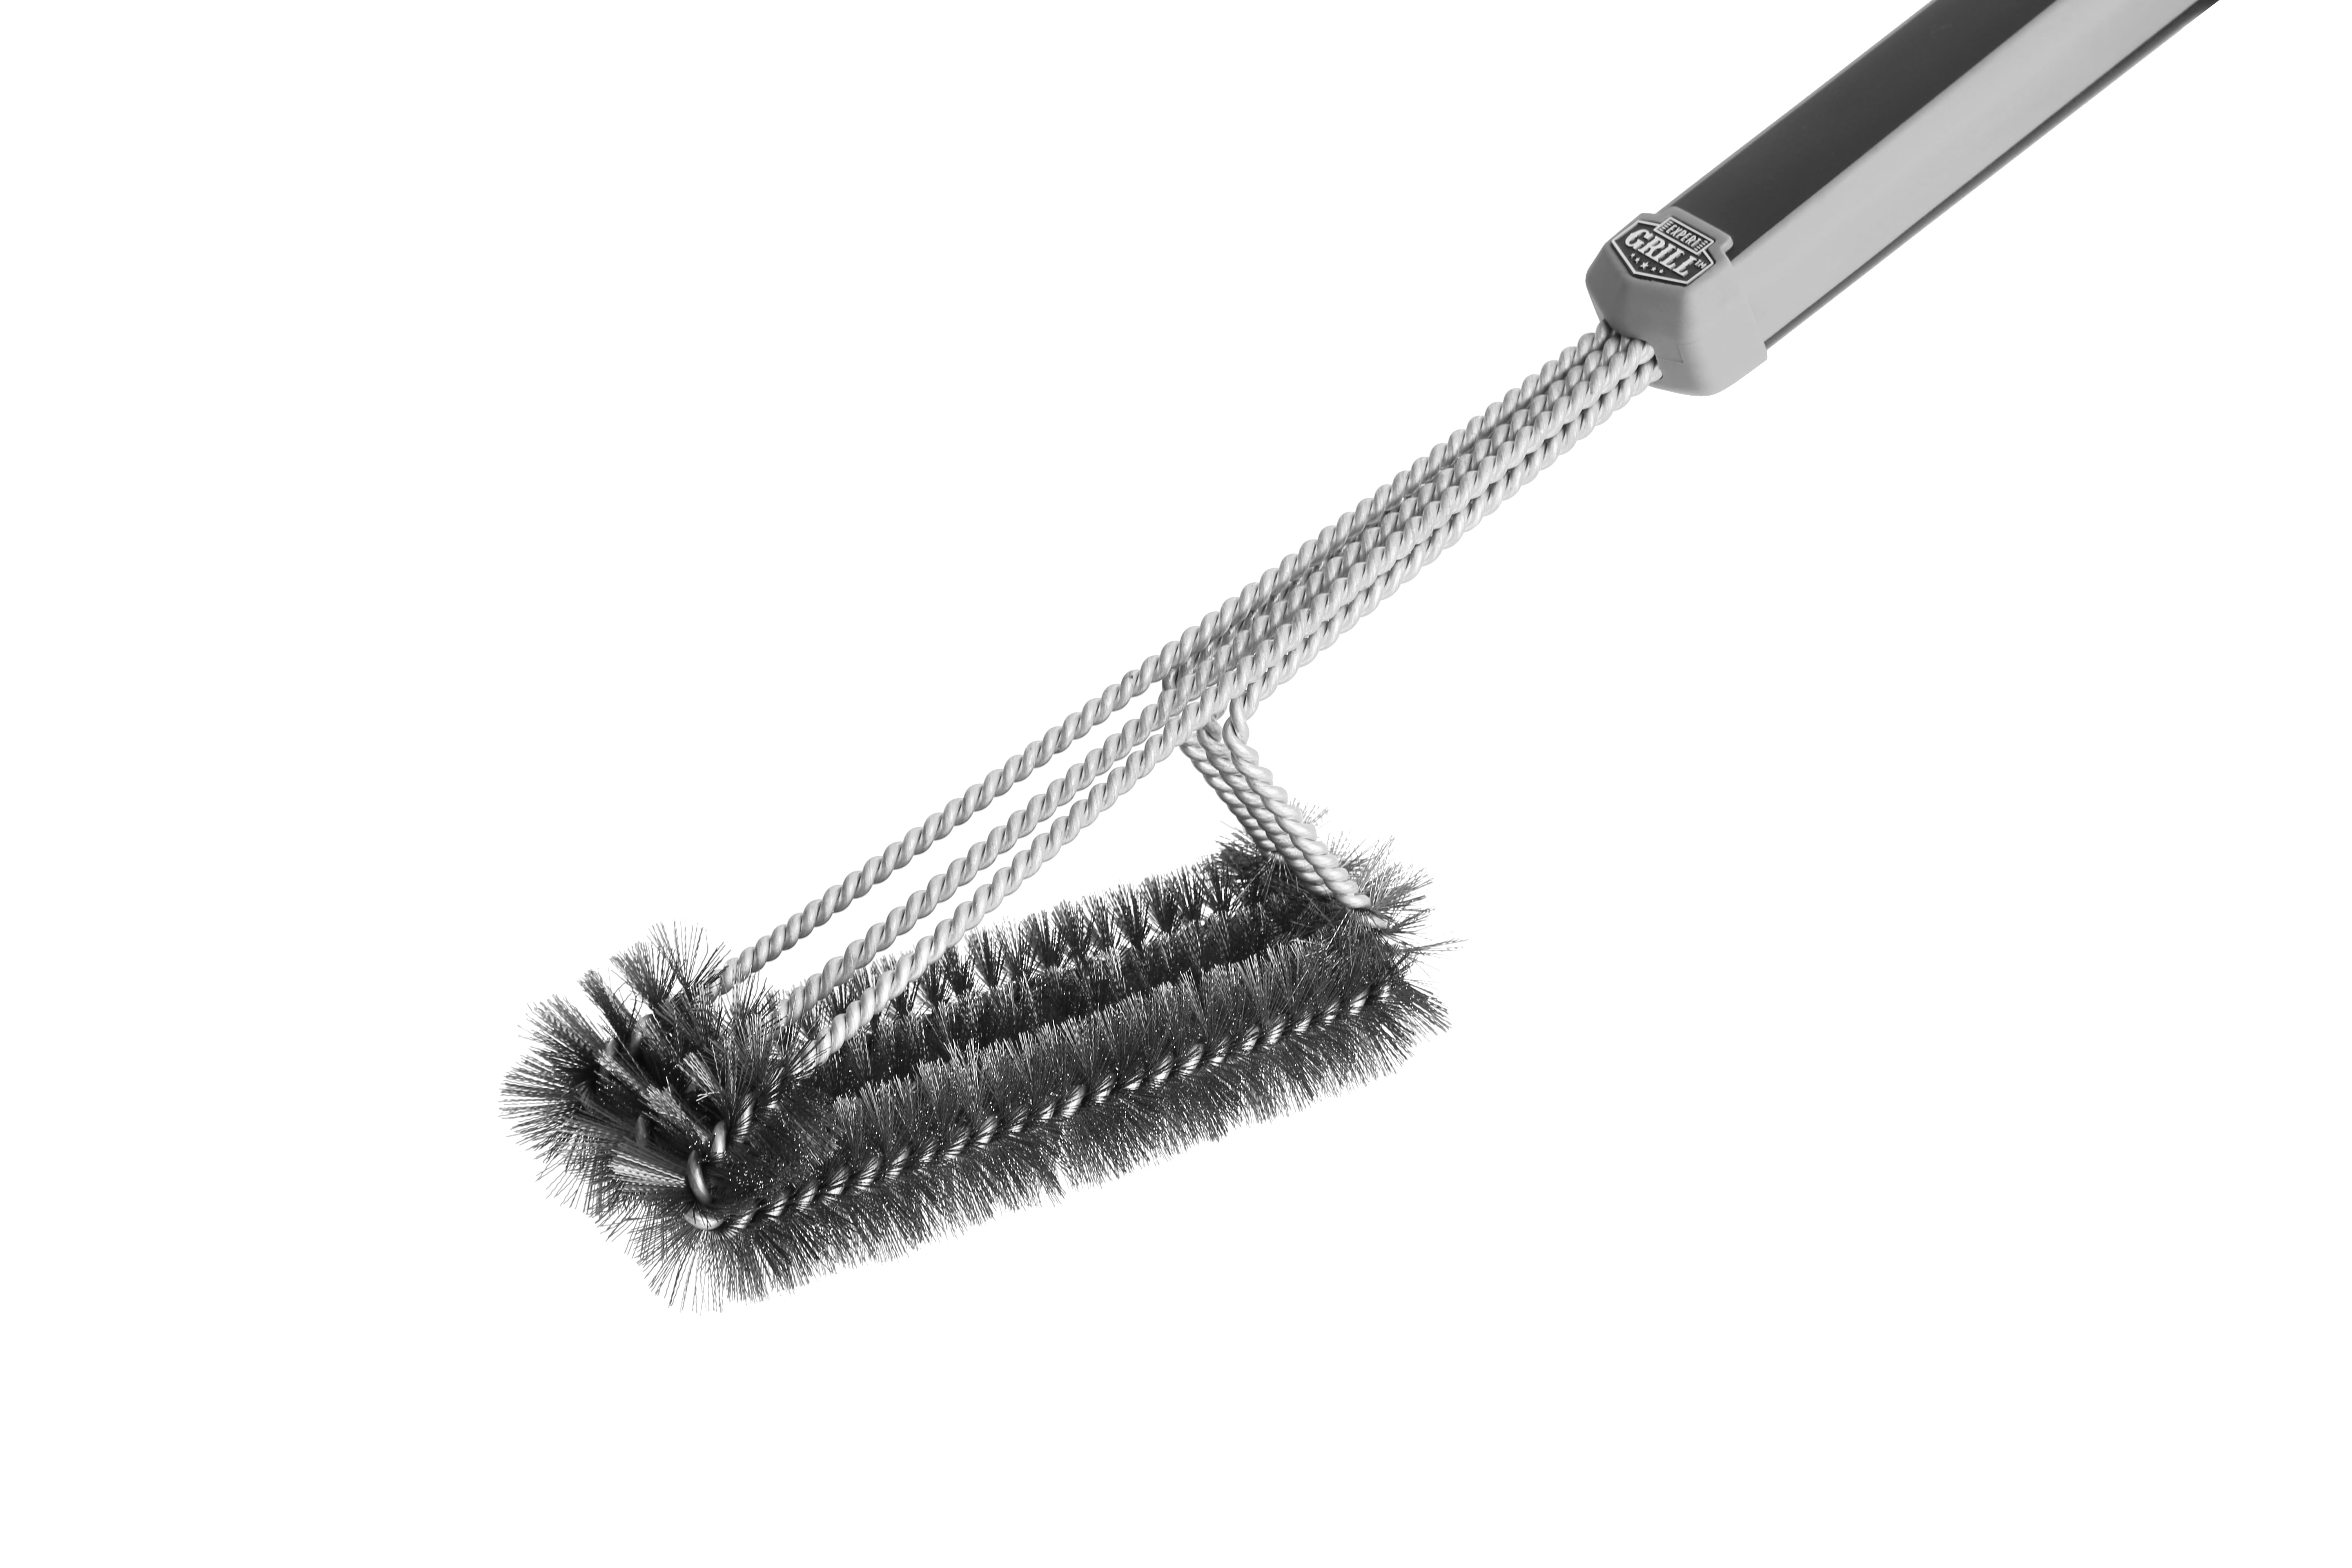 BBQ Grill Cleaning Brush Stainless Steel Barbecue Cleaner with 18in  Suitable Handle, 1 unit - Kroger